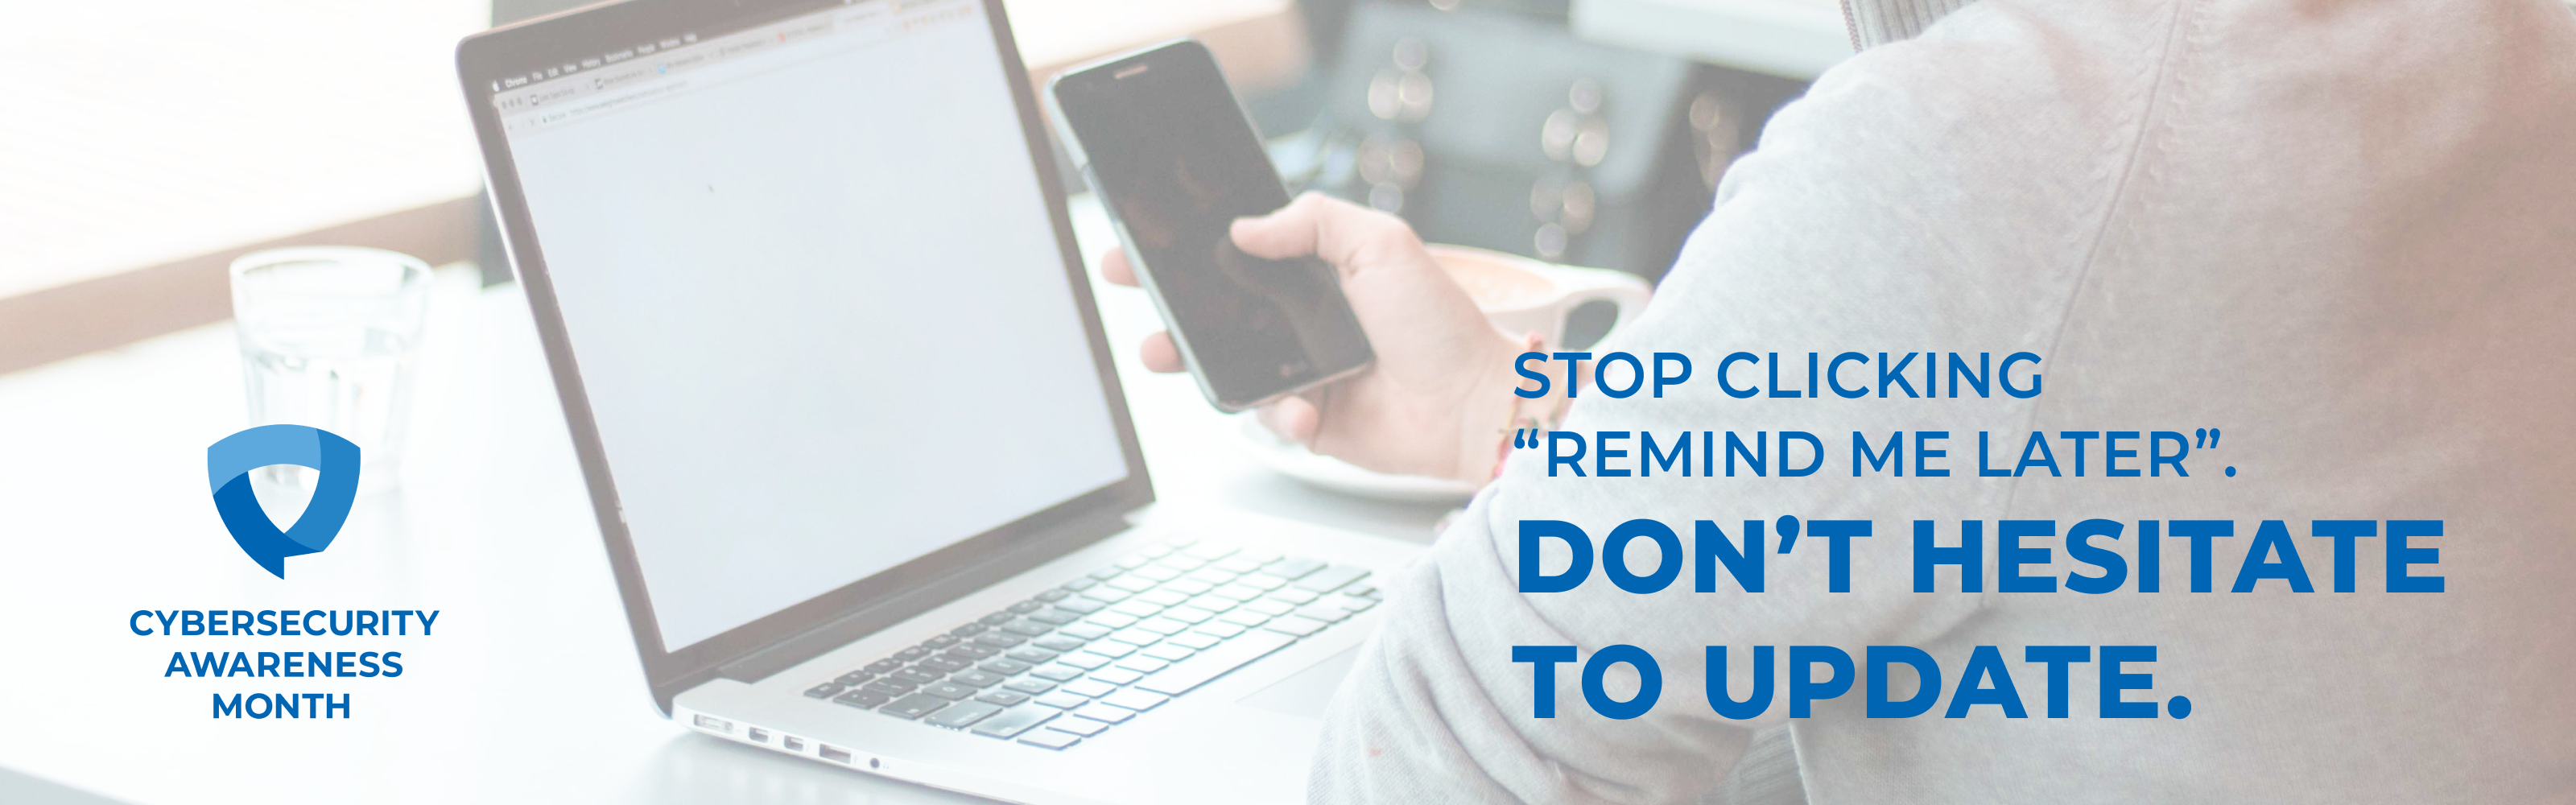 Stop Clicking "Remind me later". Don't hesitate to update.